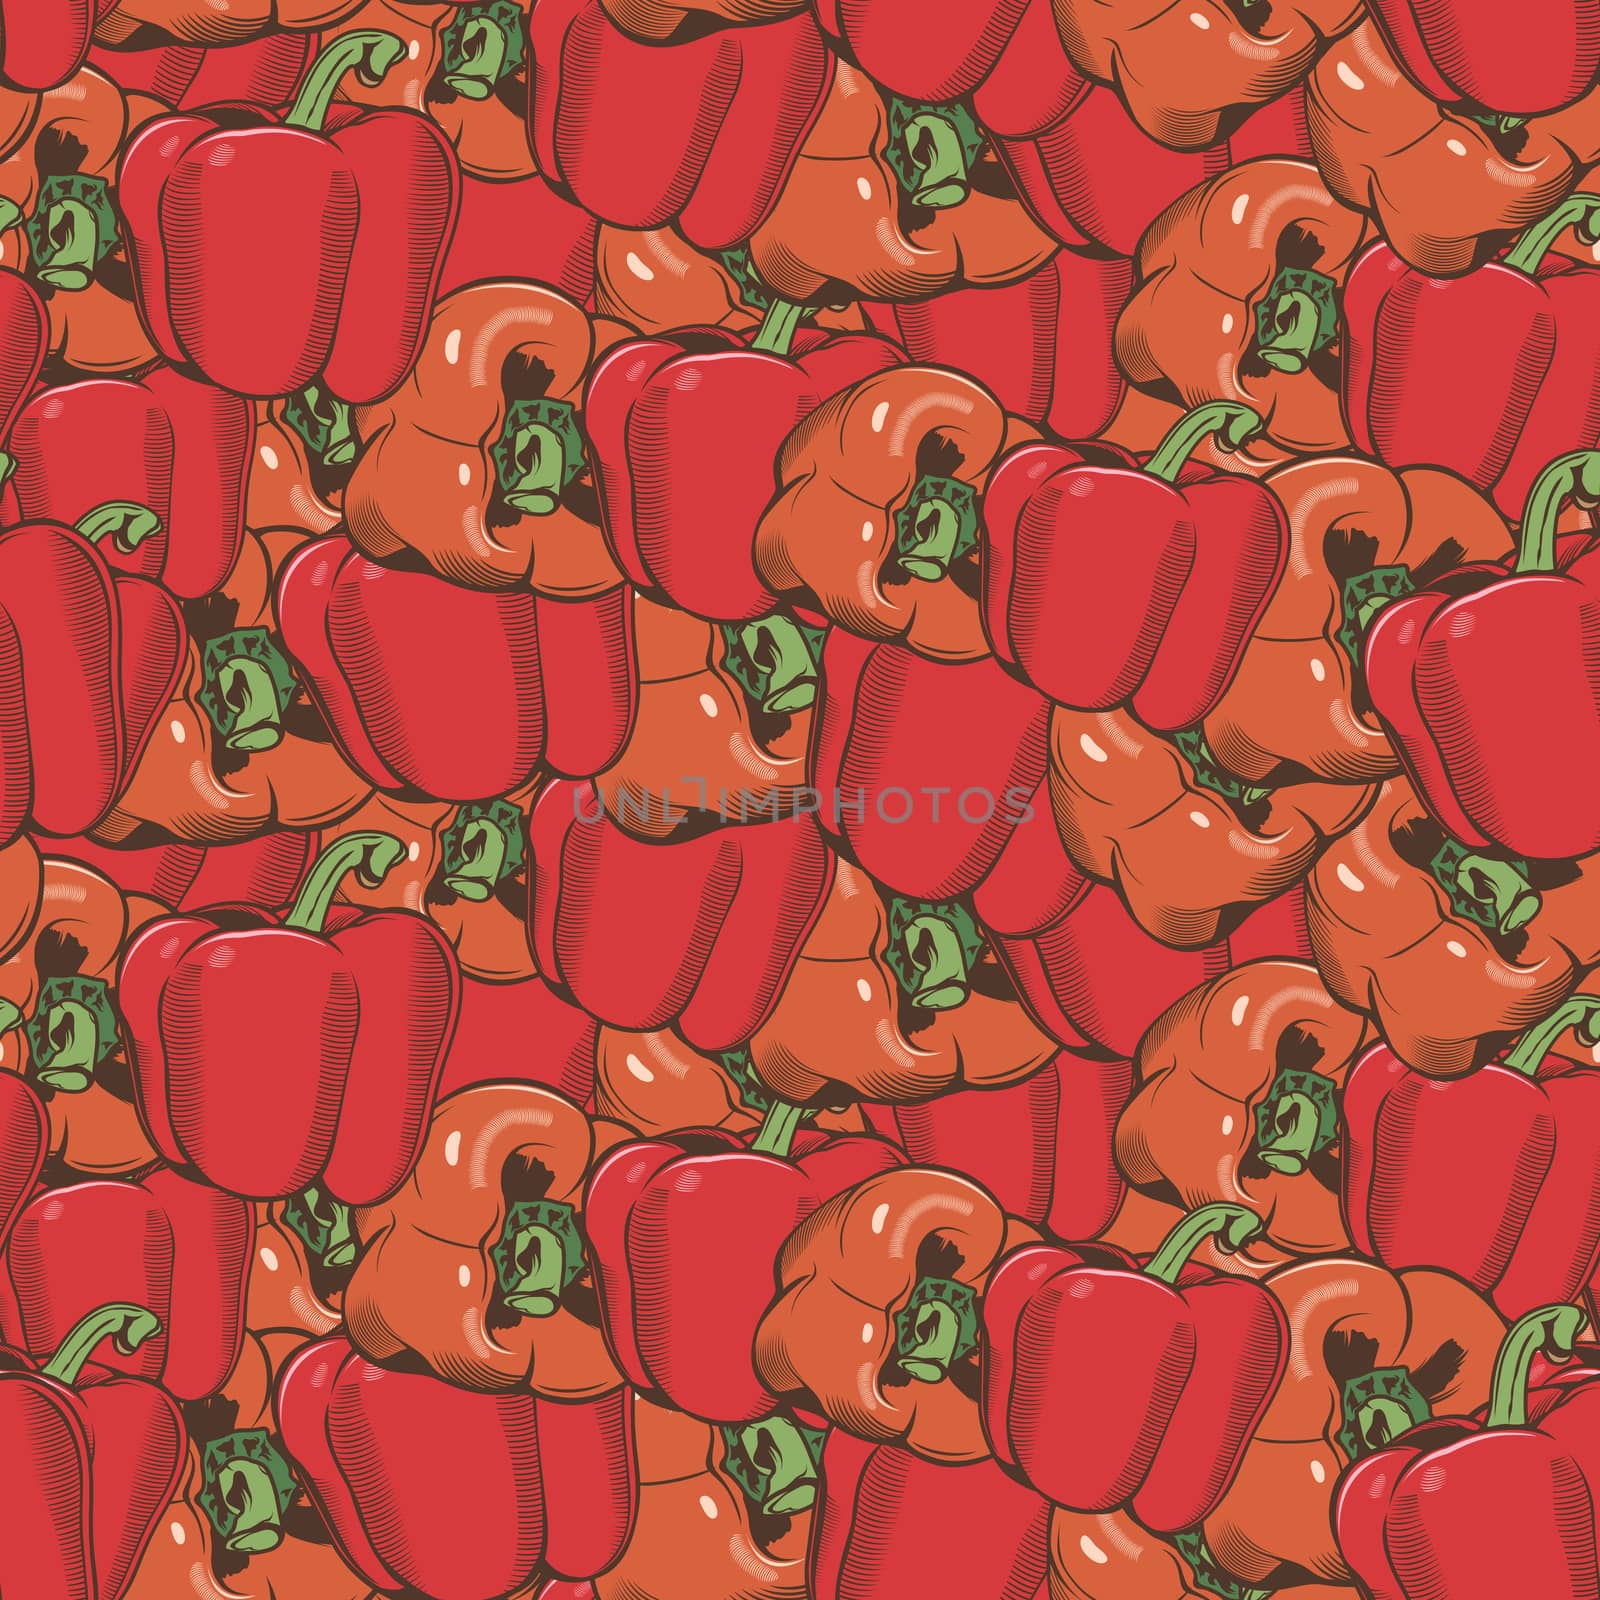 Vintage Red Pepper Seamless Pattern by ConceptCafe